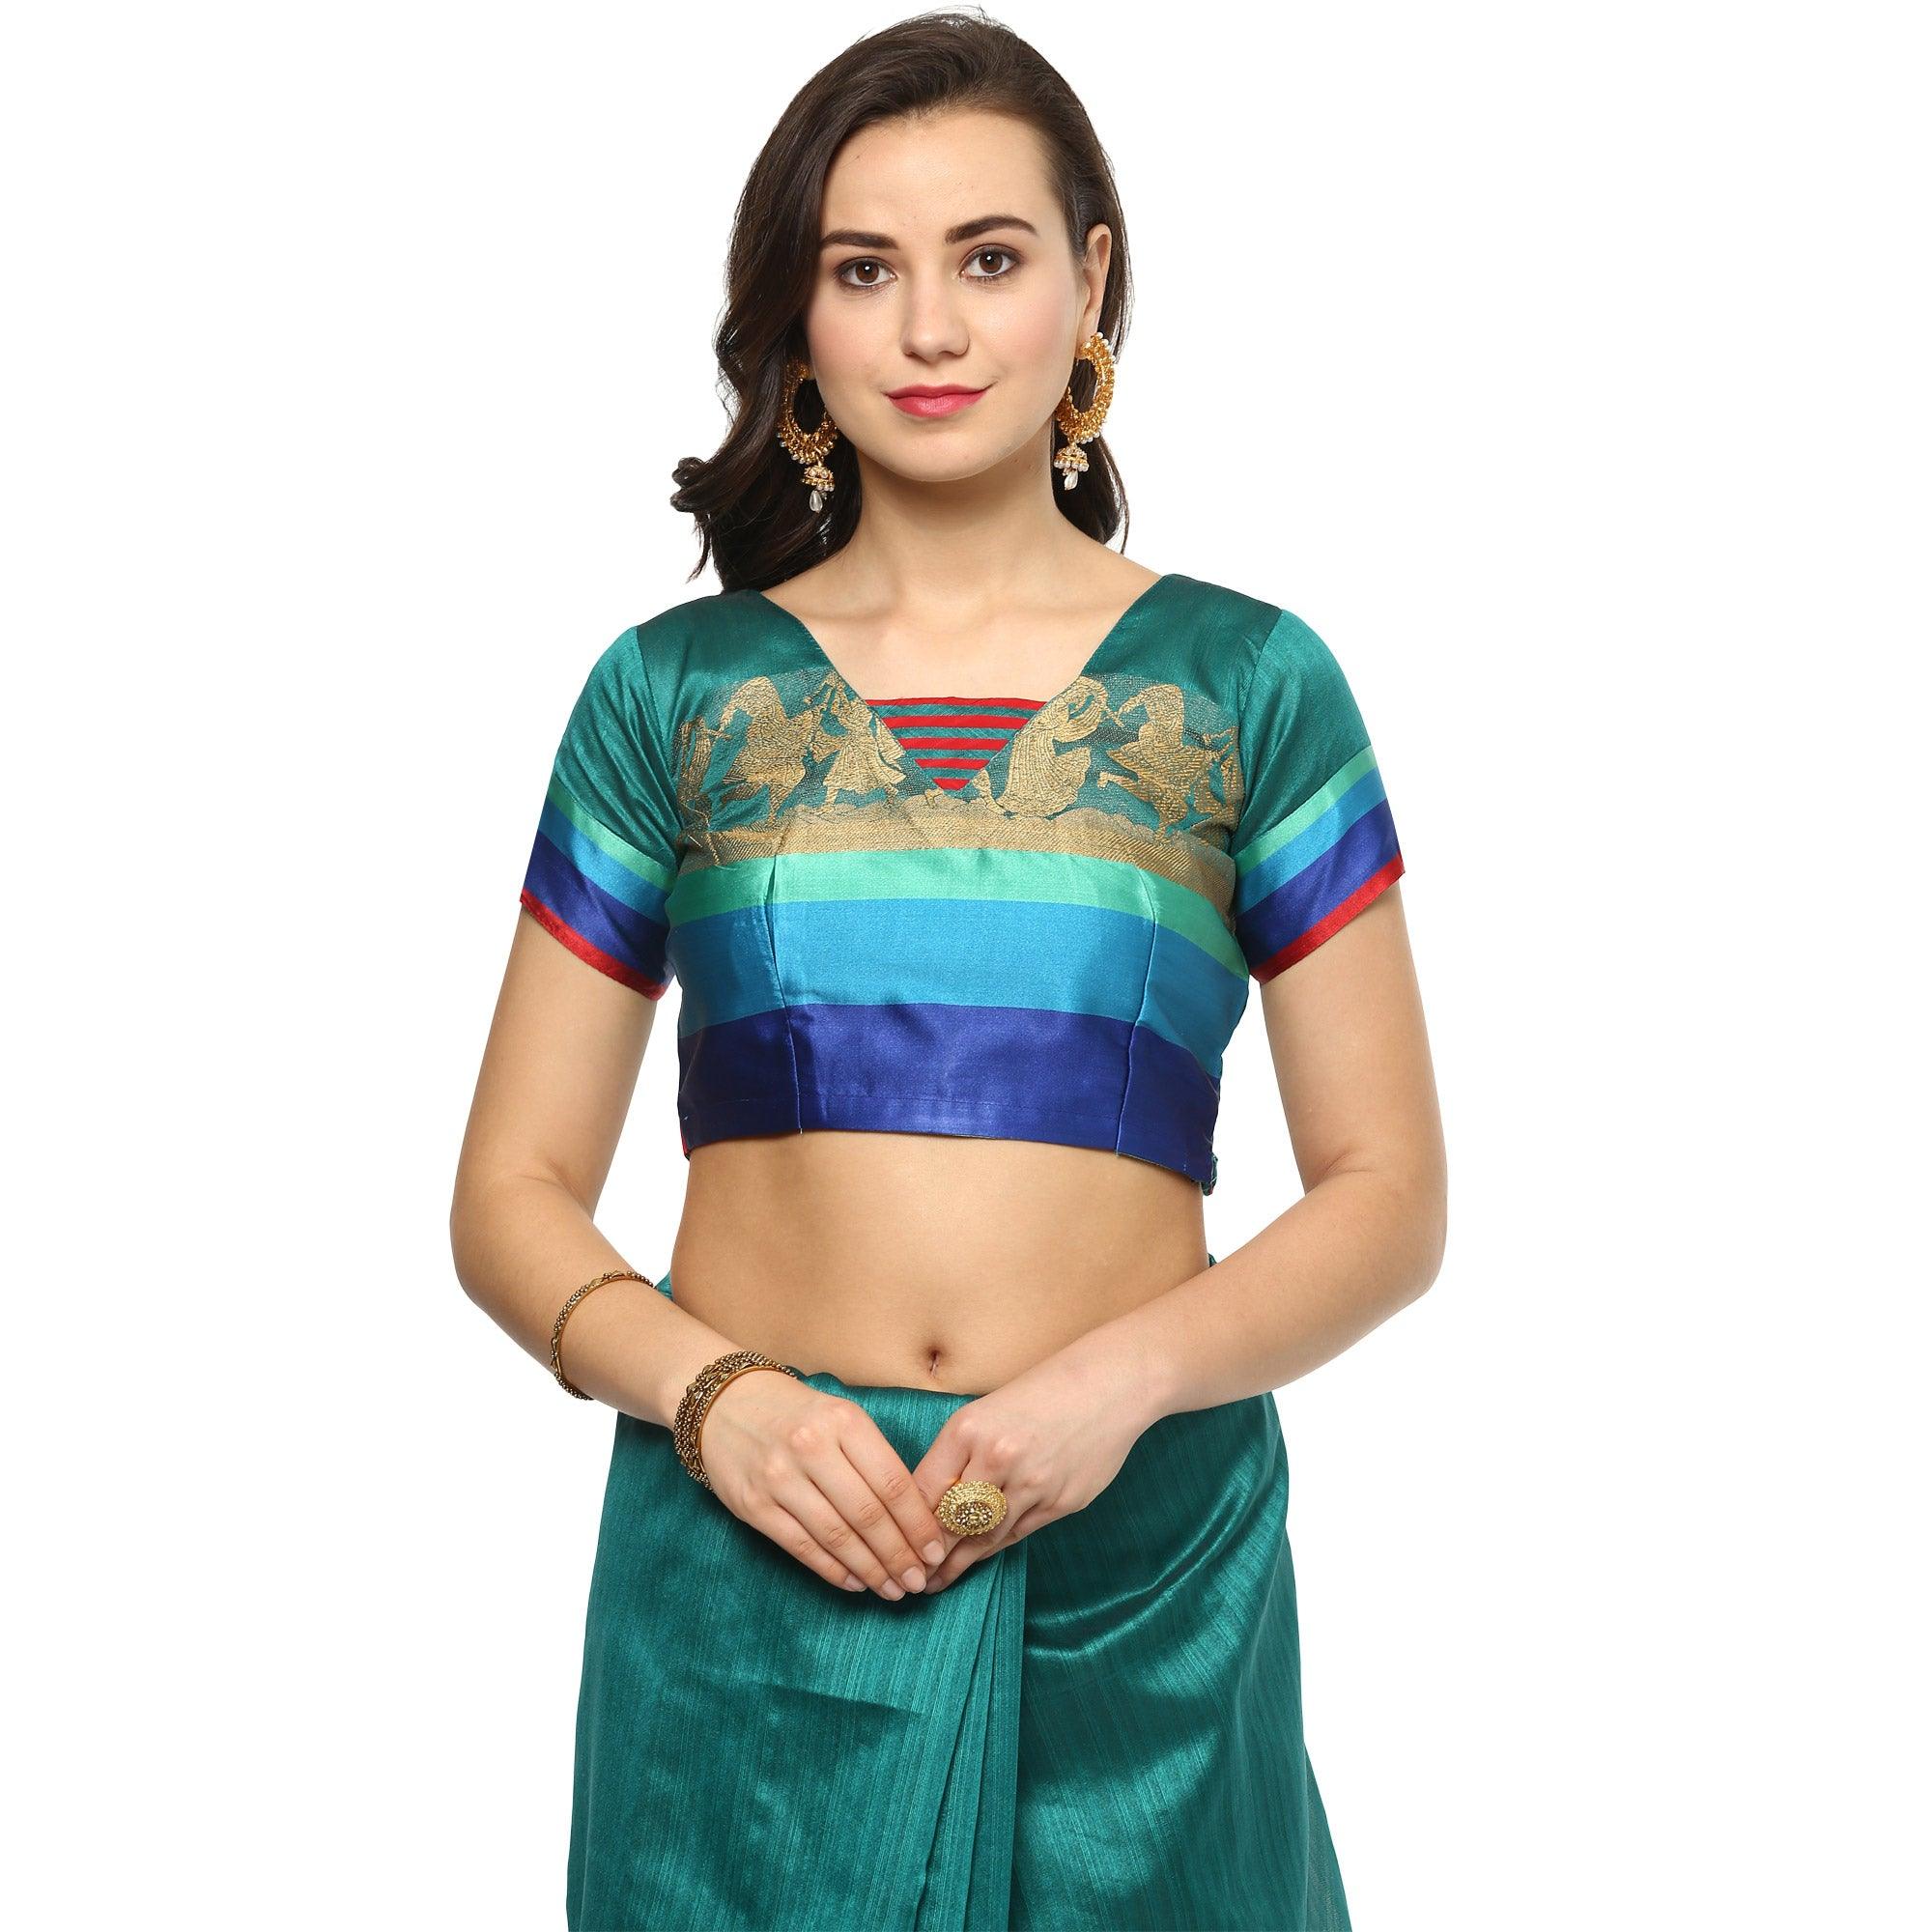 Charming Turquoise Green Colored Festive Wear Cotton Weaving Saree - Peachmode